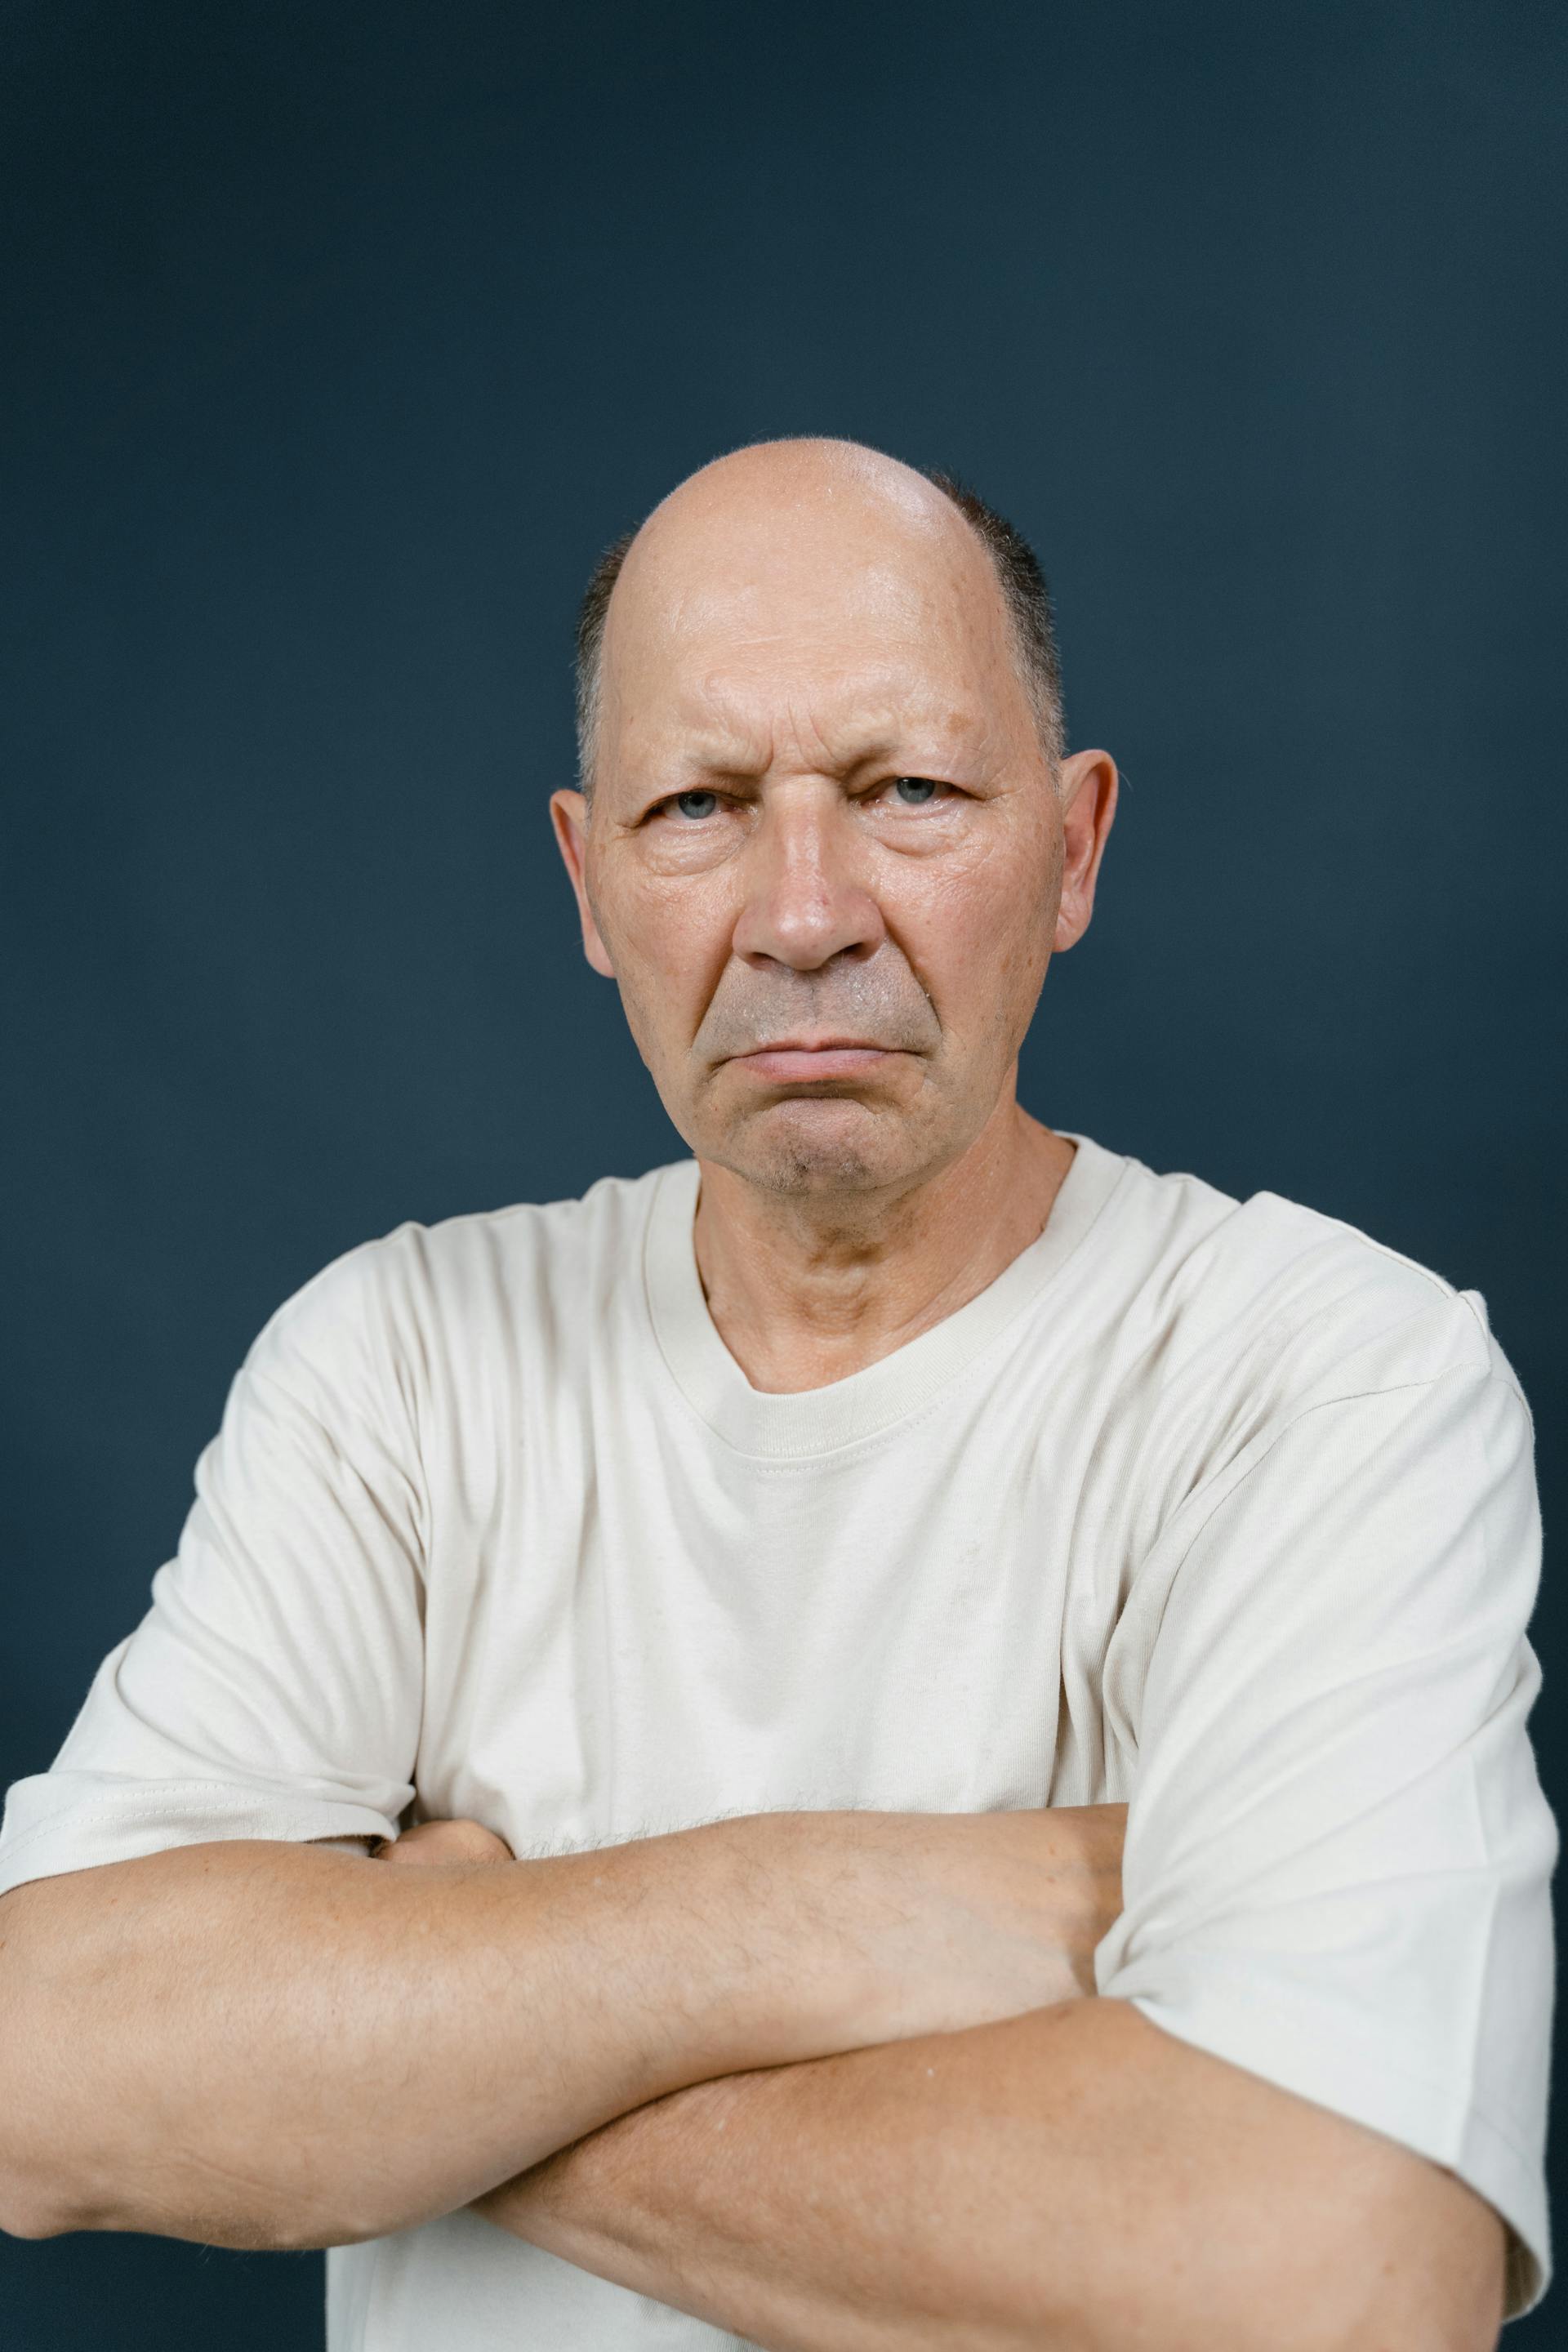 An angry older man | Source: Pexels